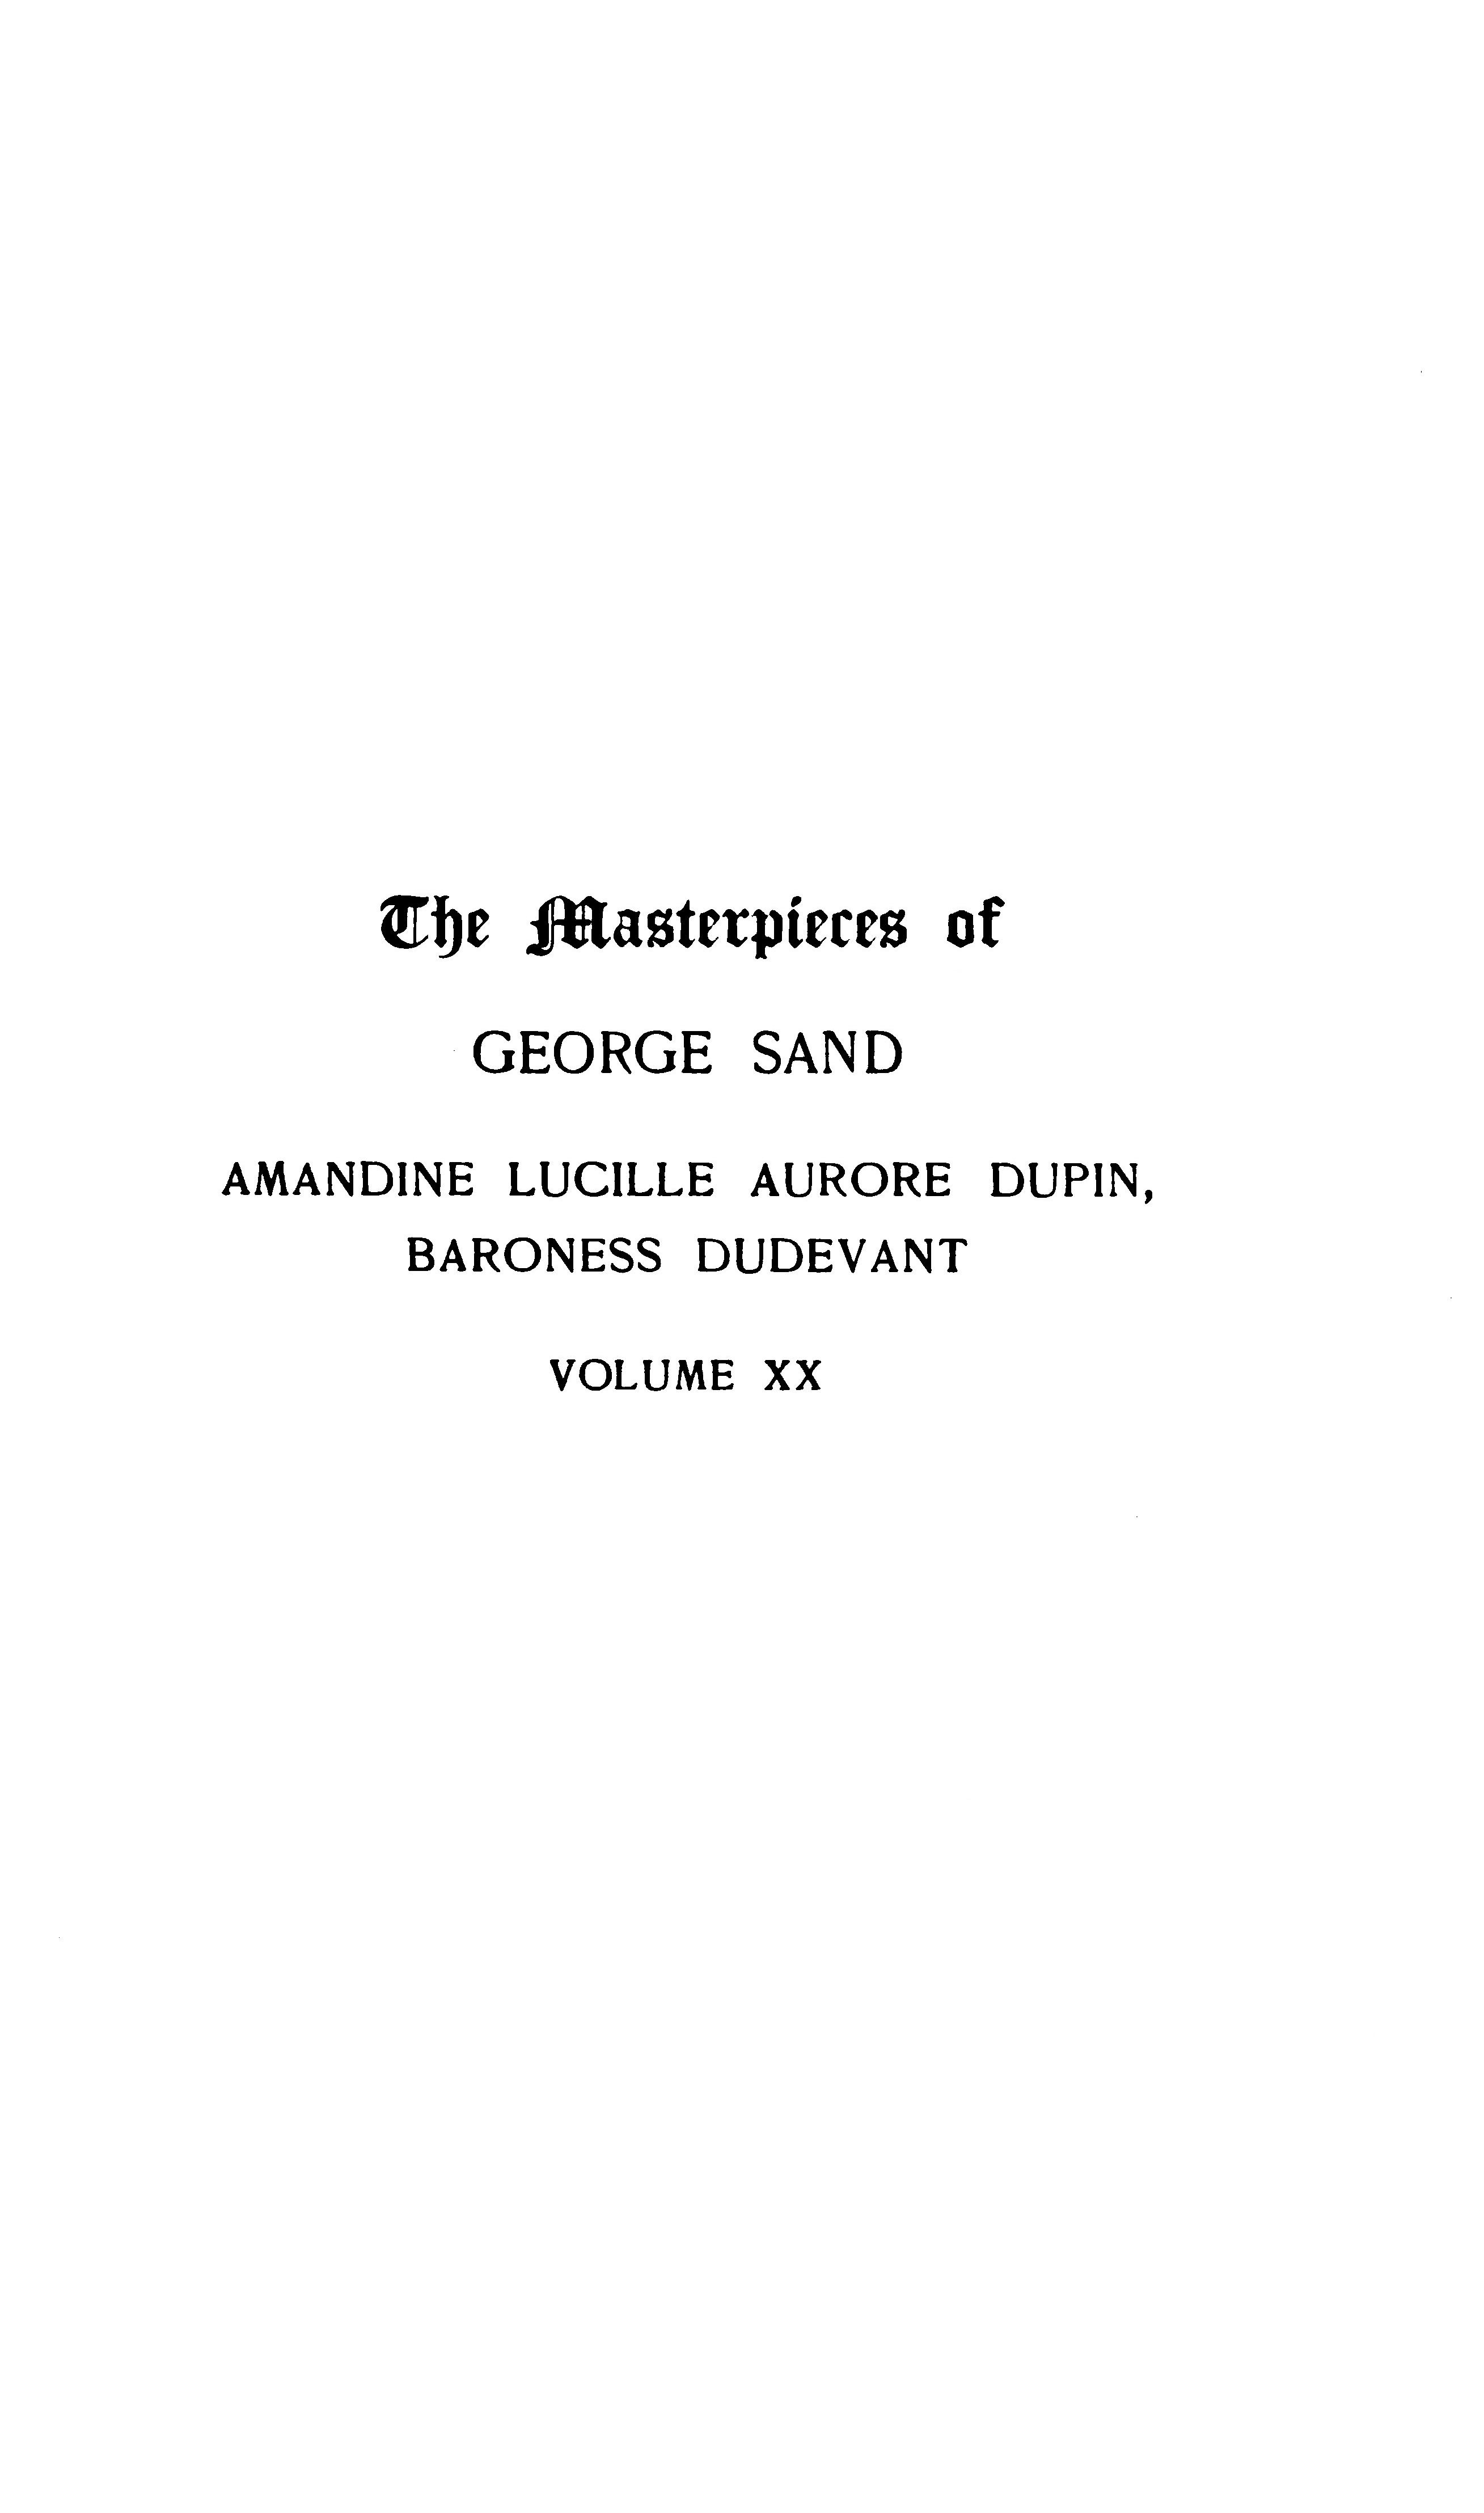 The Project Gutenberg eBook of Memoir; She and He; Lavinia, by George Sand.